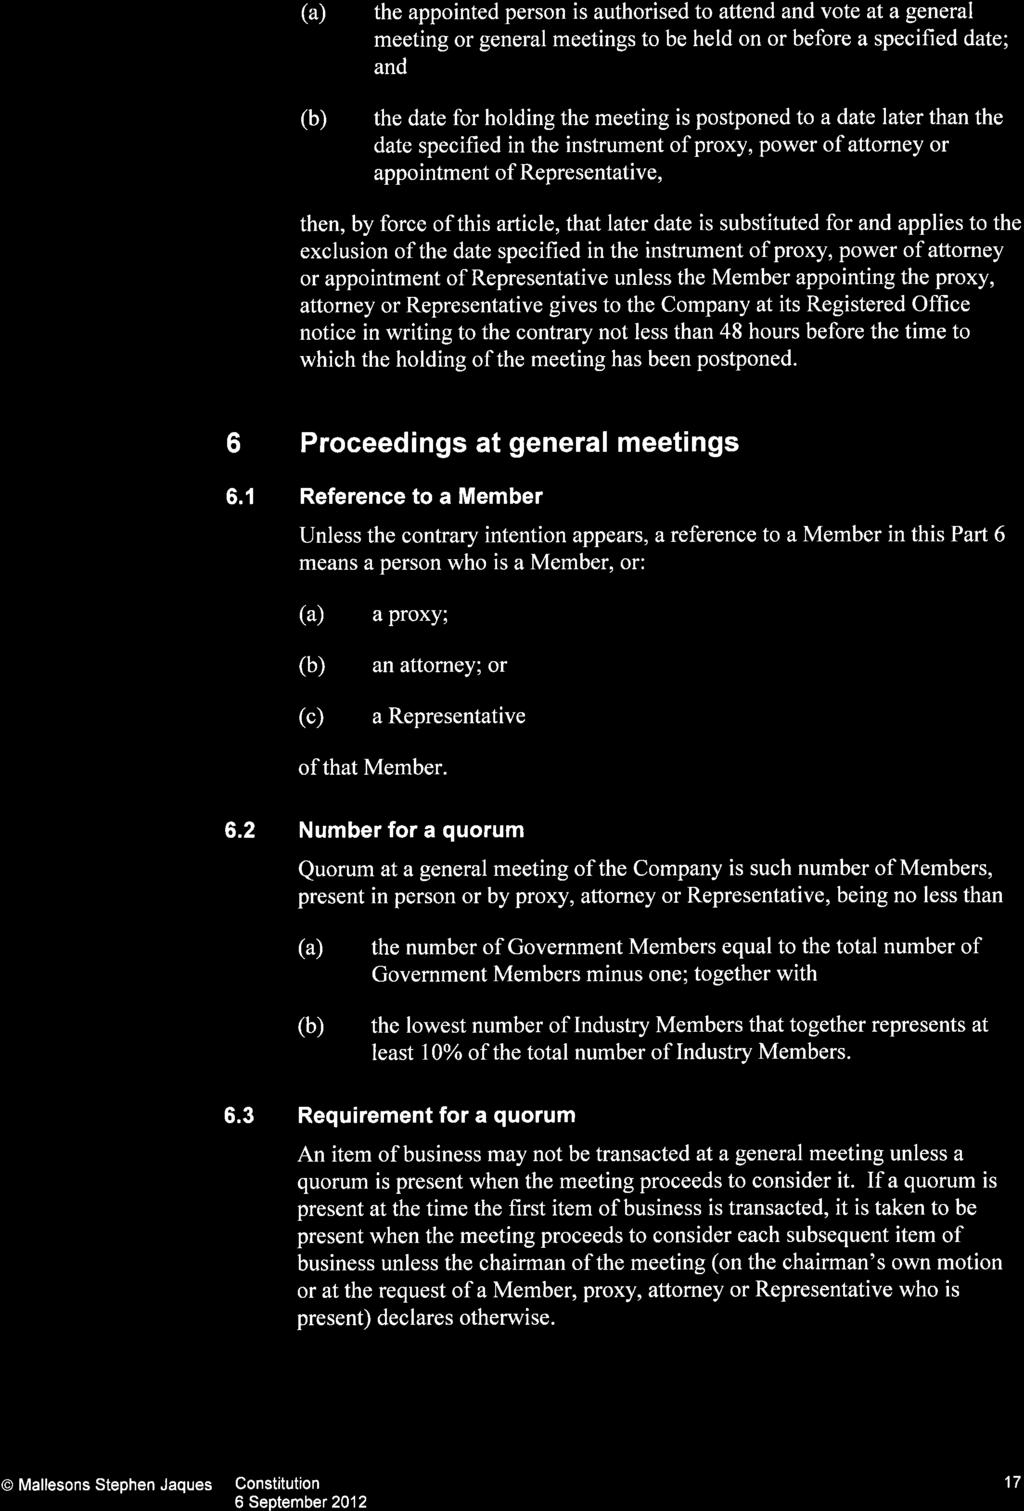 the appointed person is authorised to attend and vote at a general meeting or general meetings to be held on or before a specified date; and the date for holding the meeting is postponed to a date